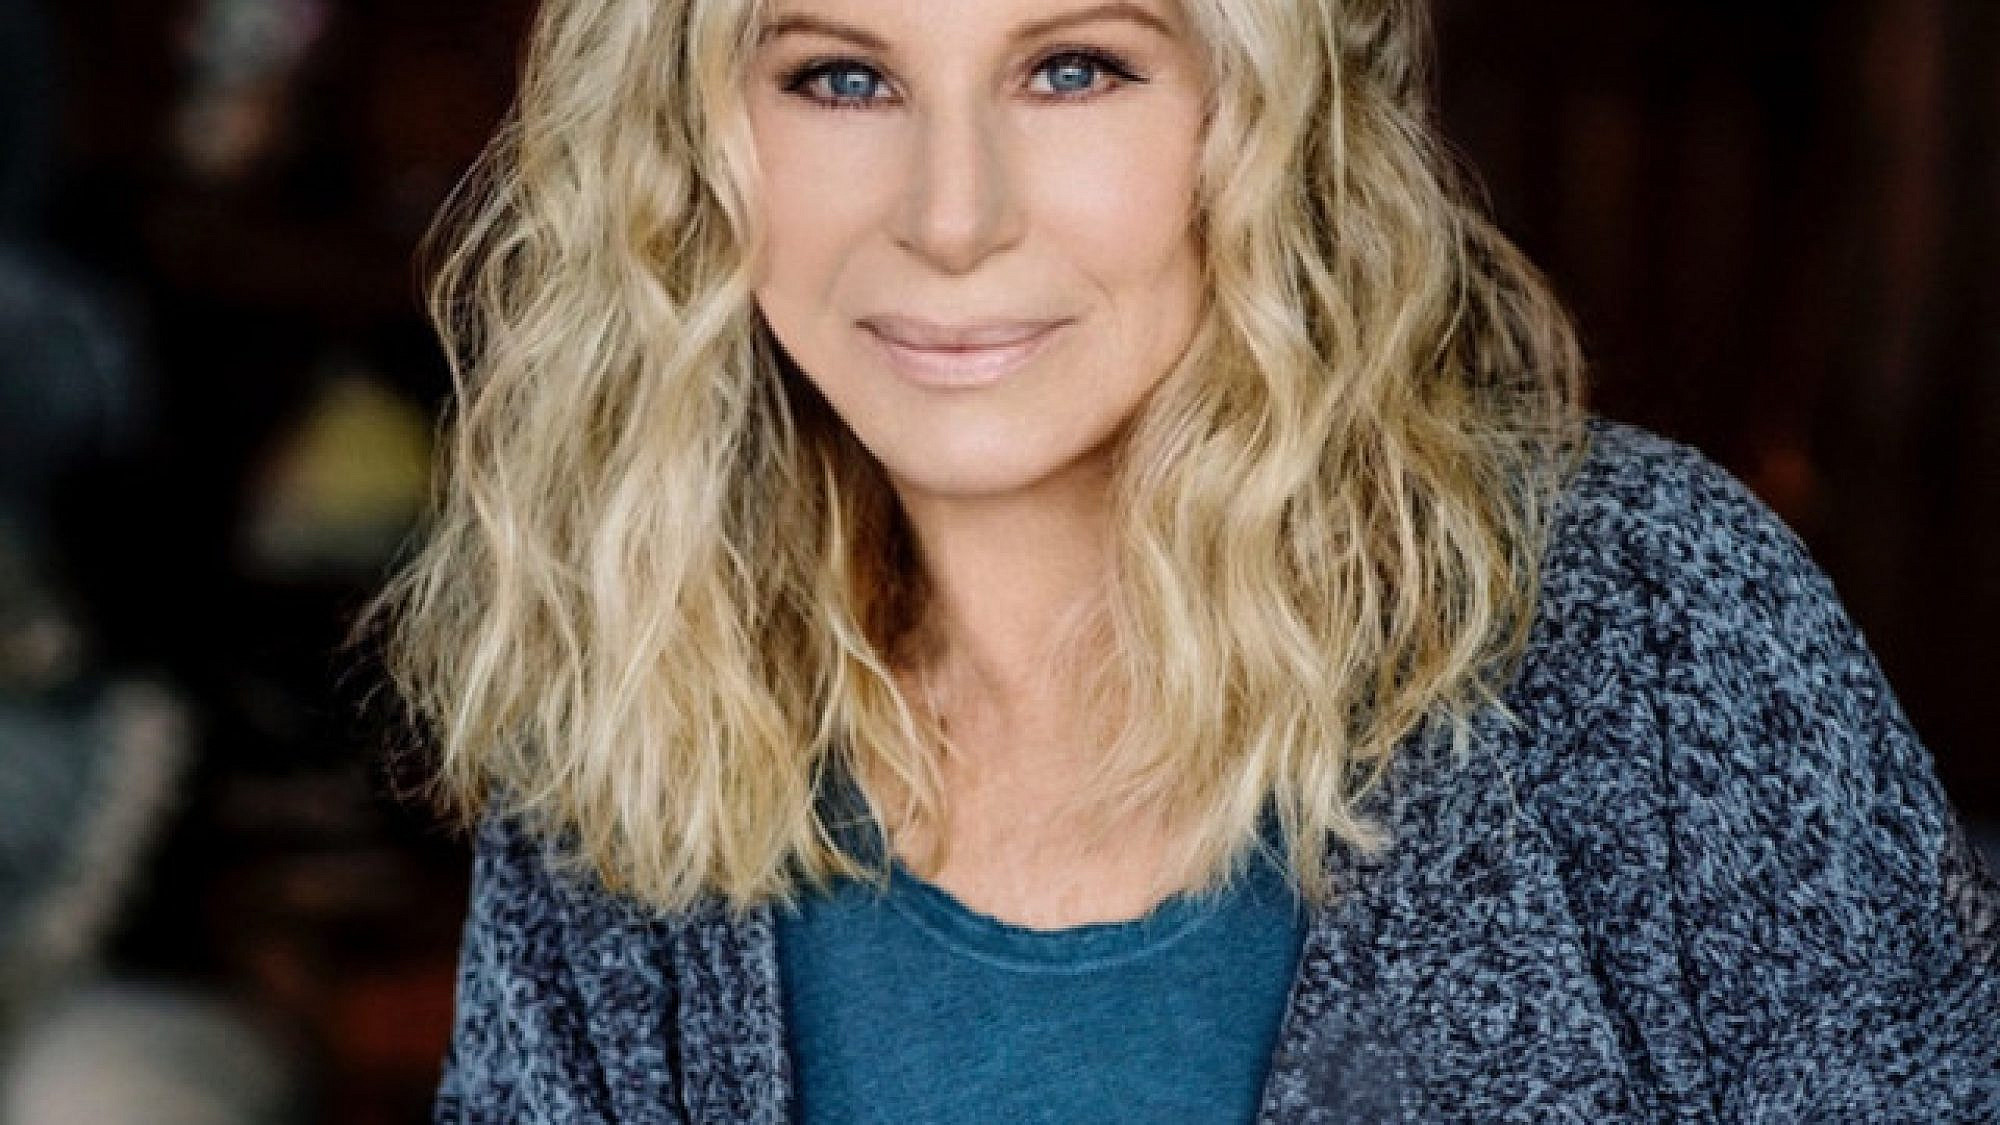 Barbra Streisand will be among the celebrities to speak at the Claims Conference virtual celebration of Holocaust survivors. Credit: Courtesy of Barbra Steisand.